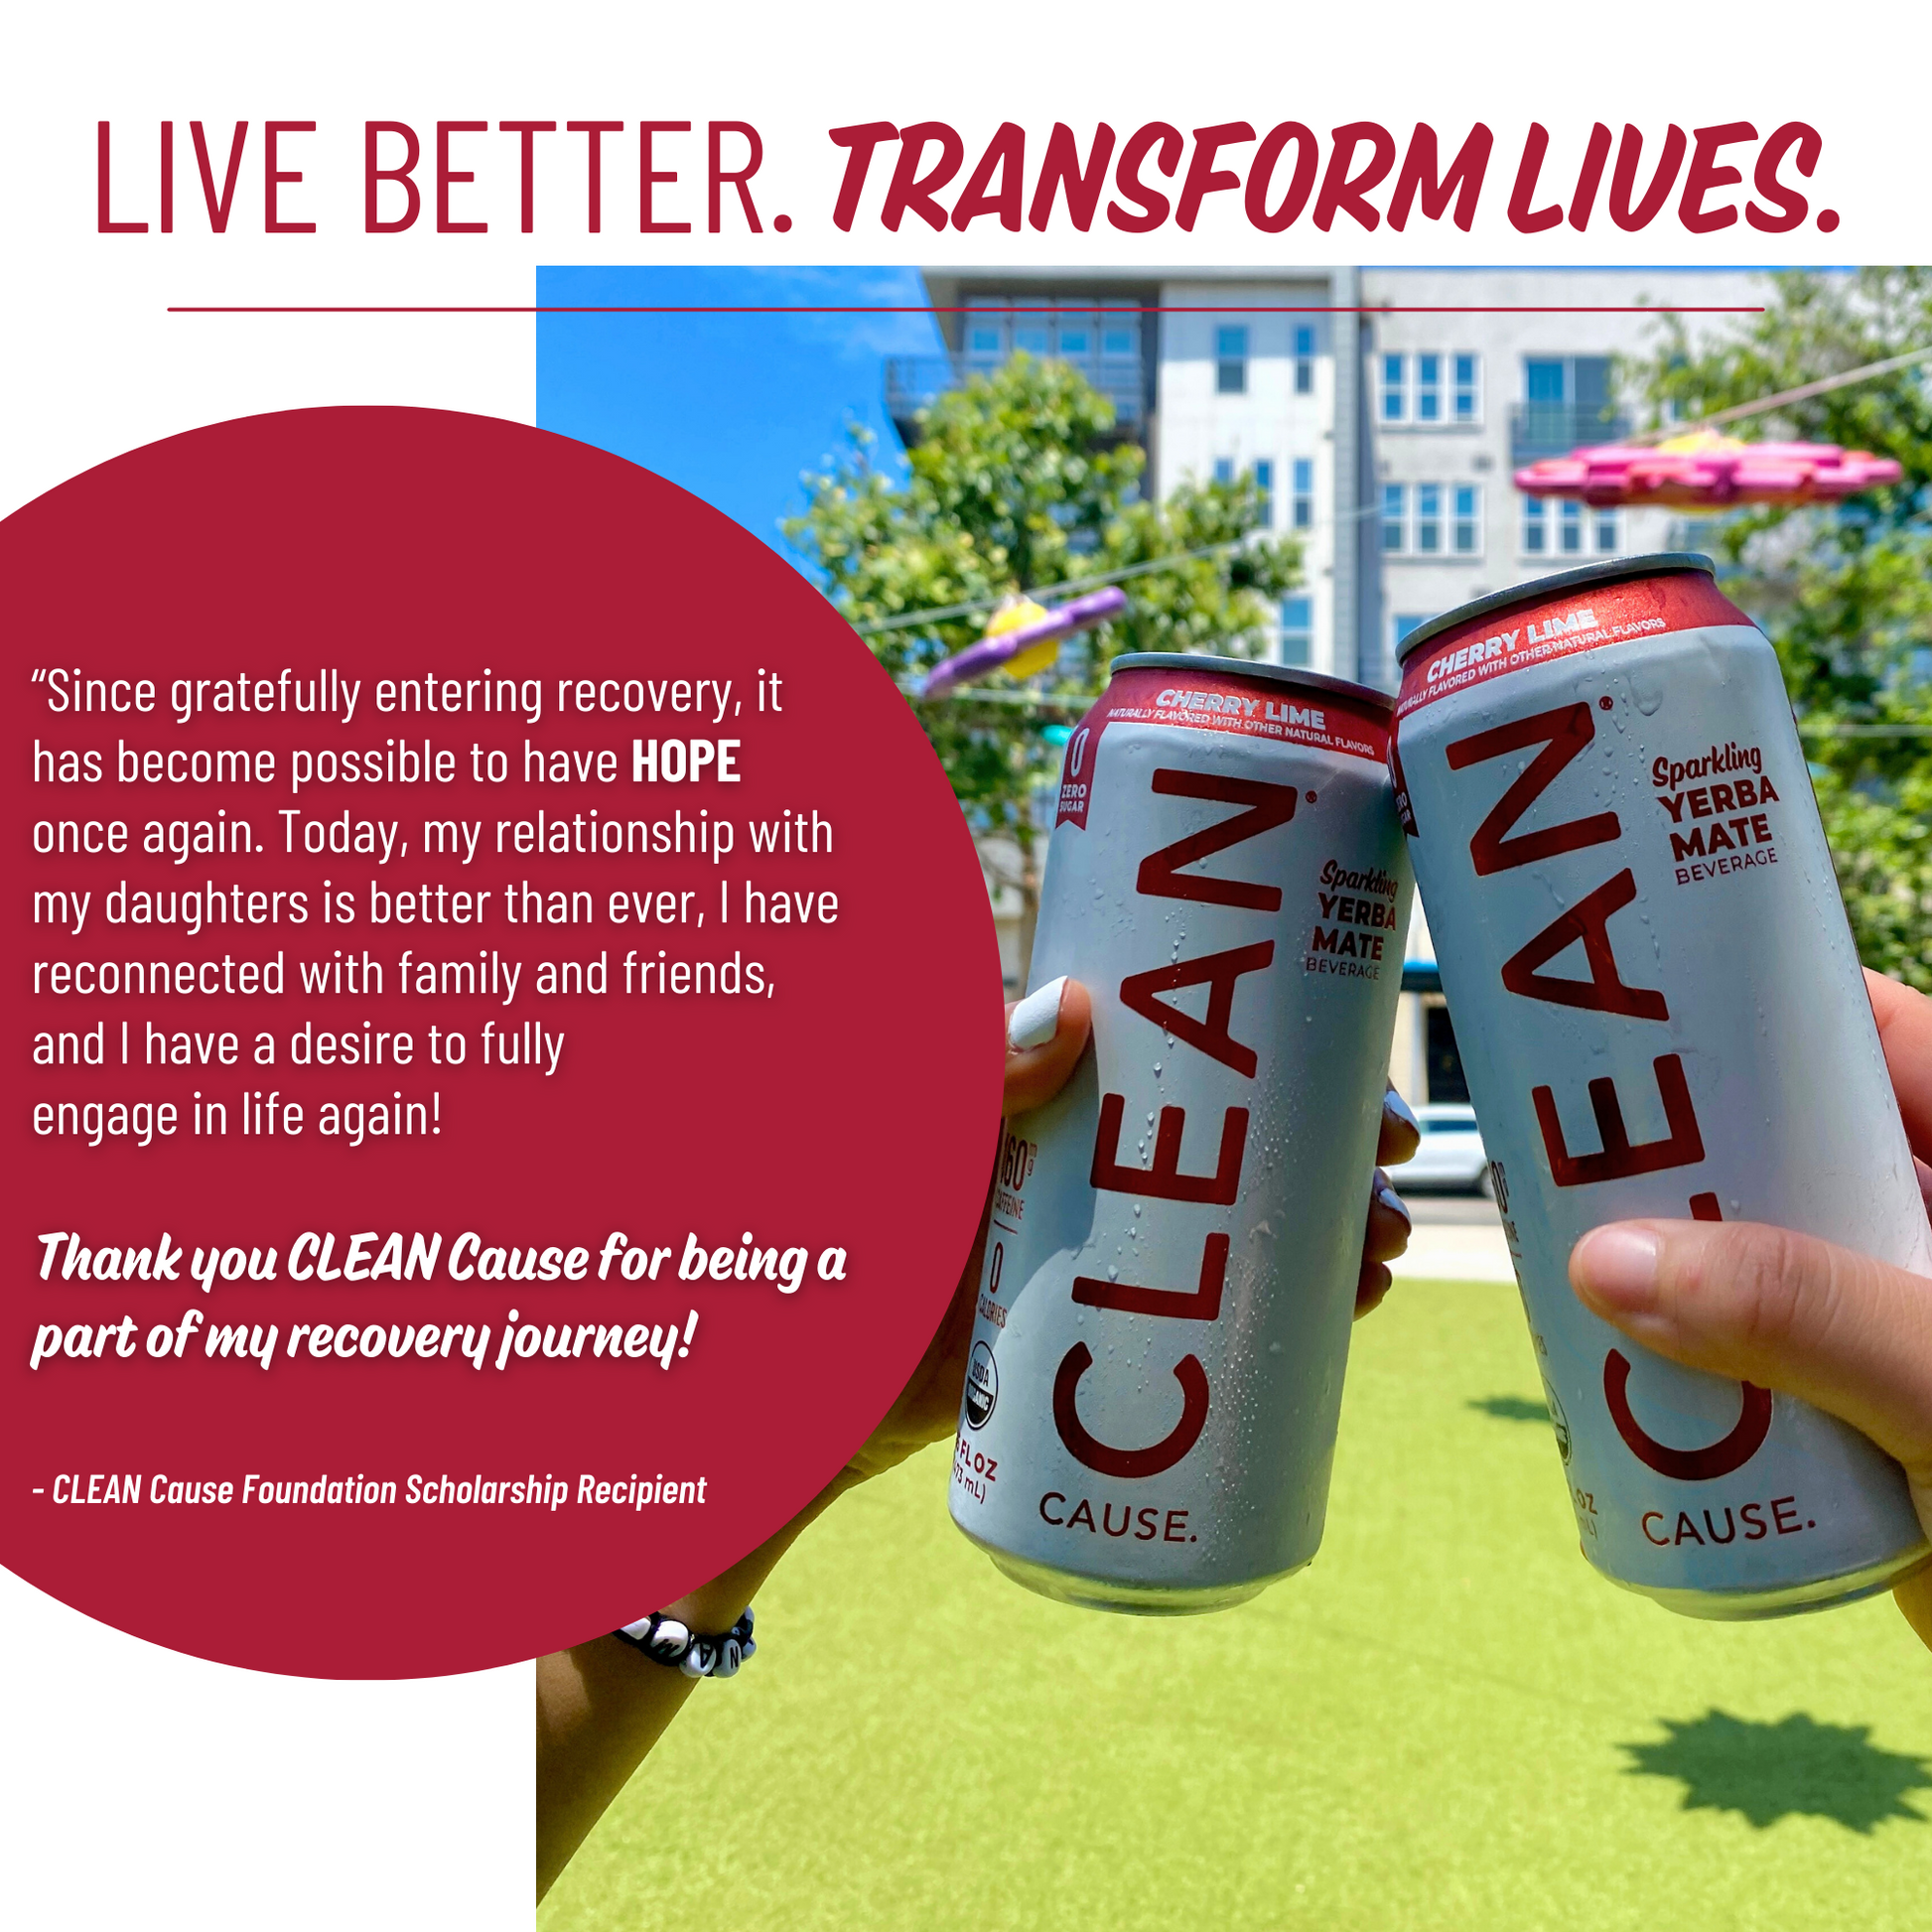 A picture of two cheersing Cherry Lime CLEAN Cause cans with the slogan Live Better. Transform Lives. above it and a scholarship recipient story to the left